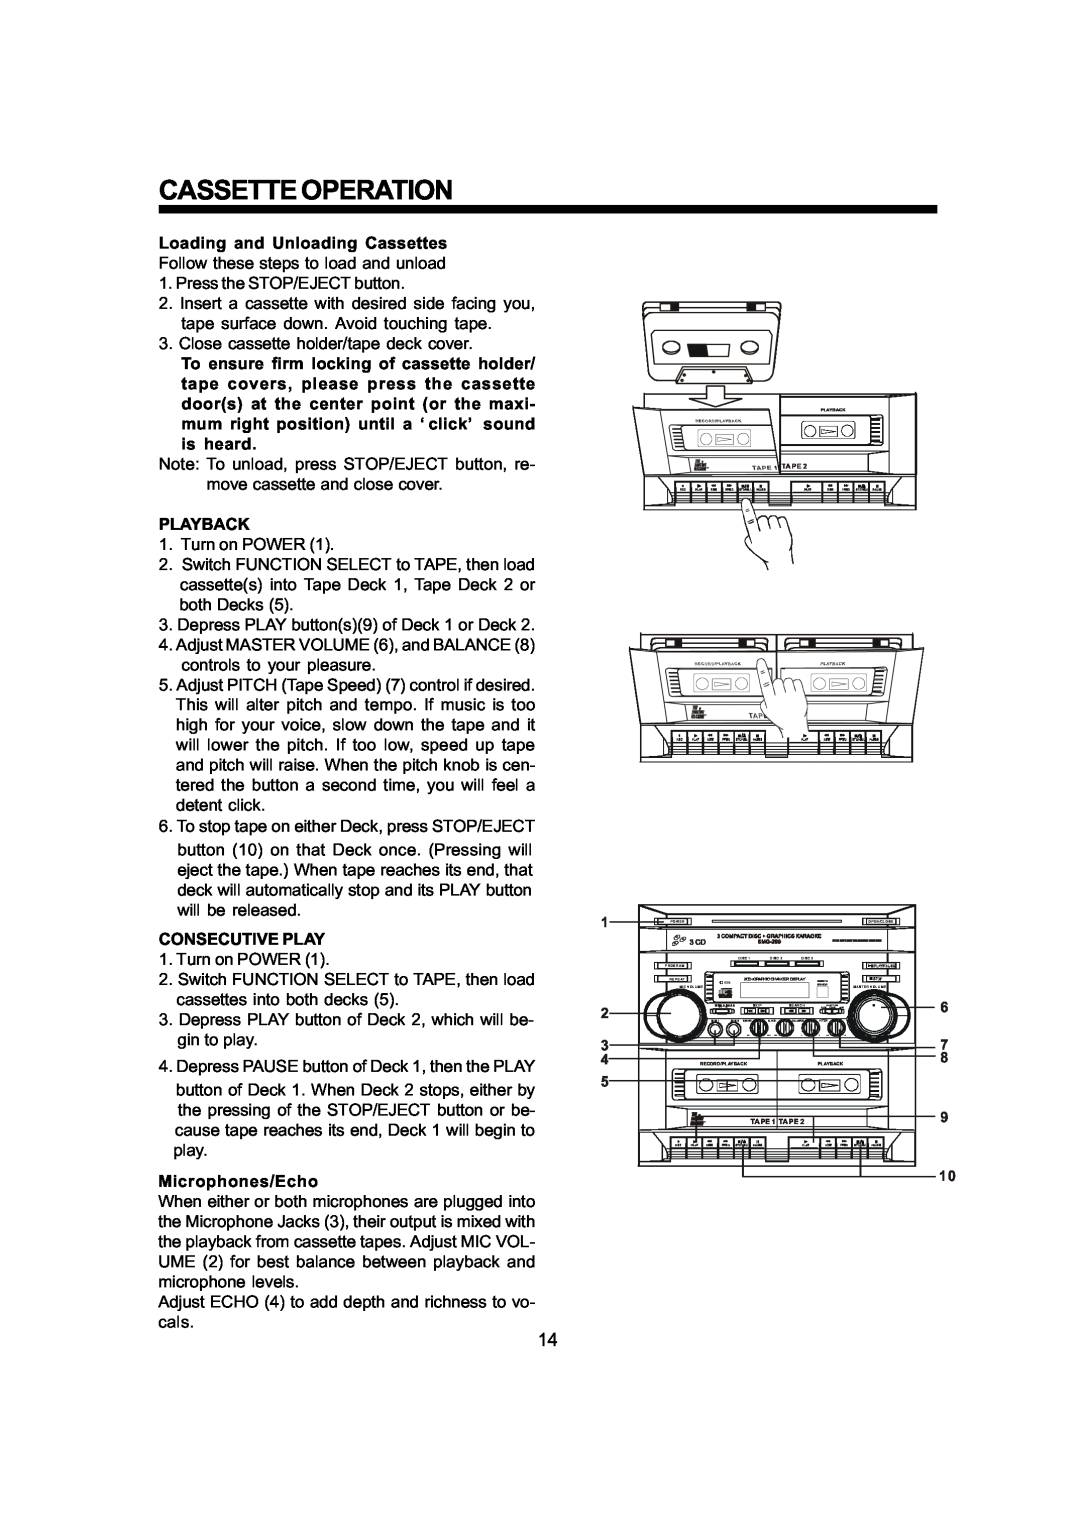 The Singing Machine SMG - 299 owner manual Cassetteoperation 